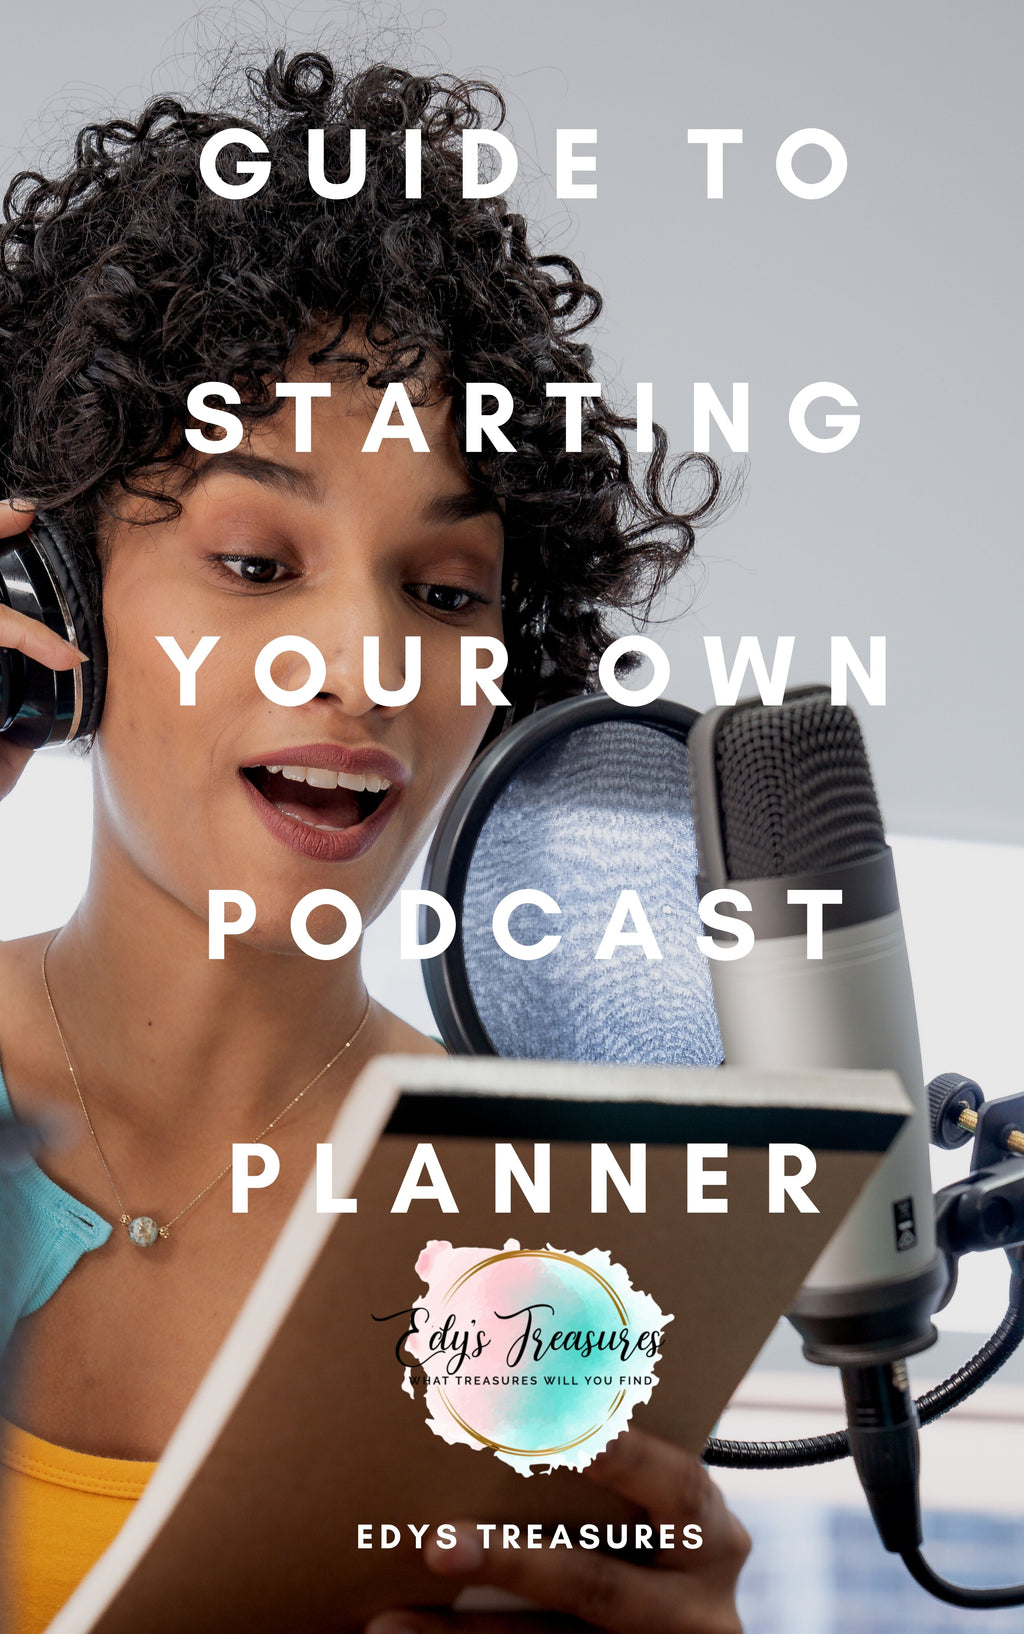 GUIDE TO STARTING YOUR PODCAST PLANNER - Edy's Treasures